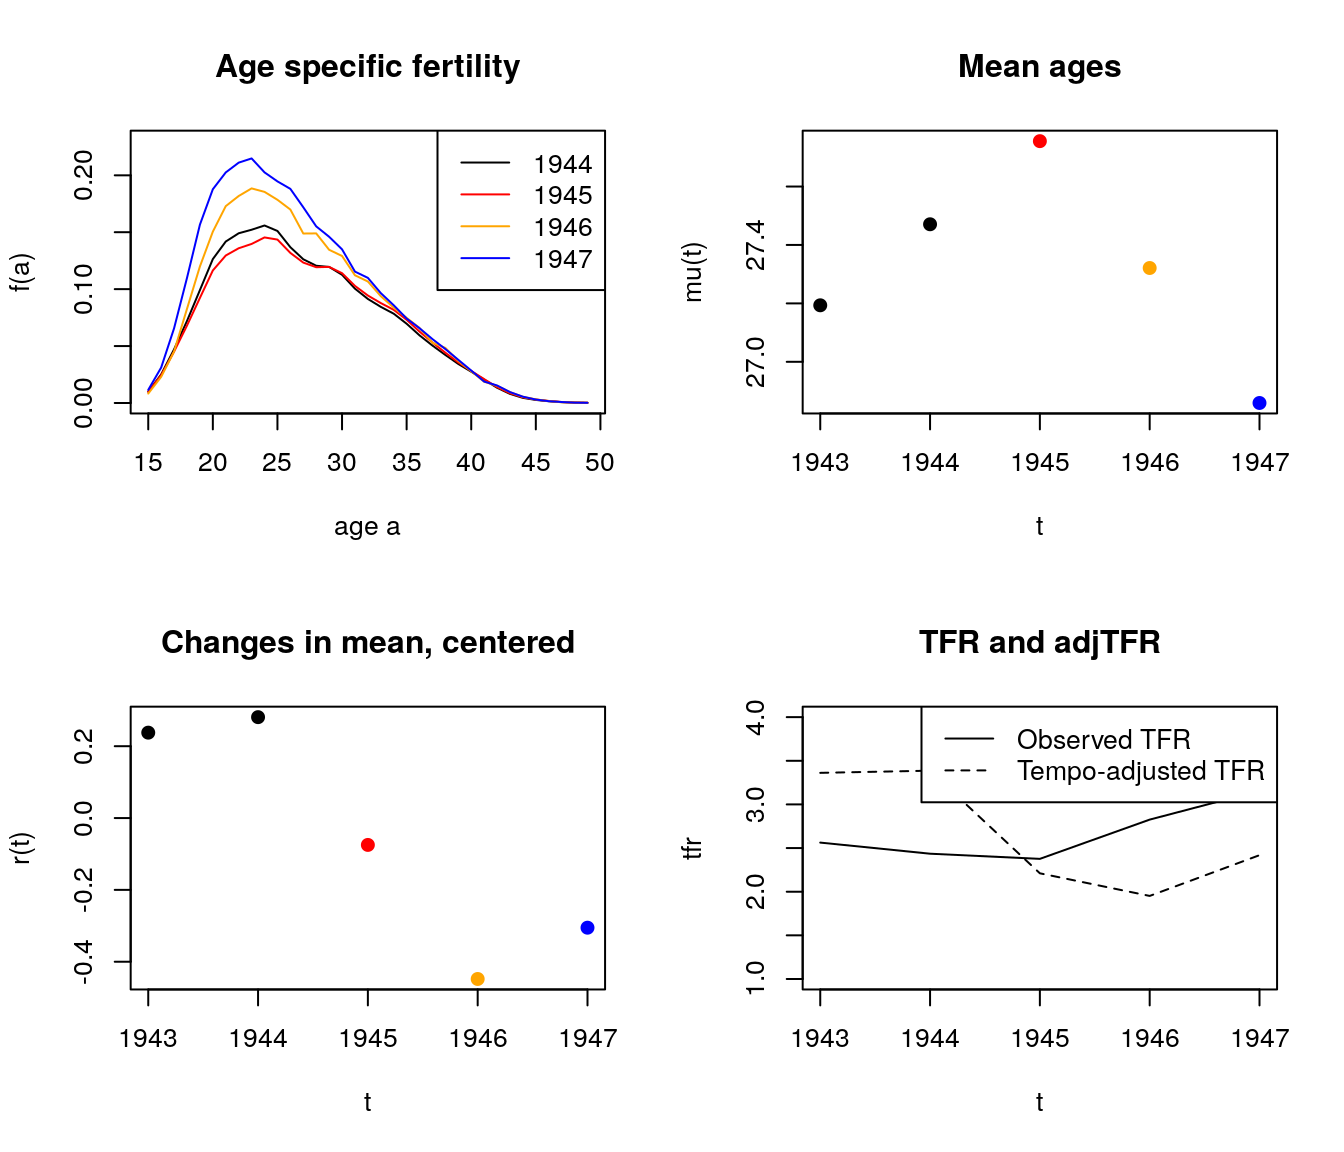 Change in fertility rates around WWII